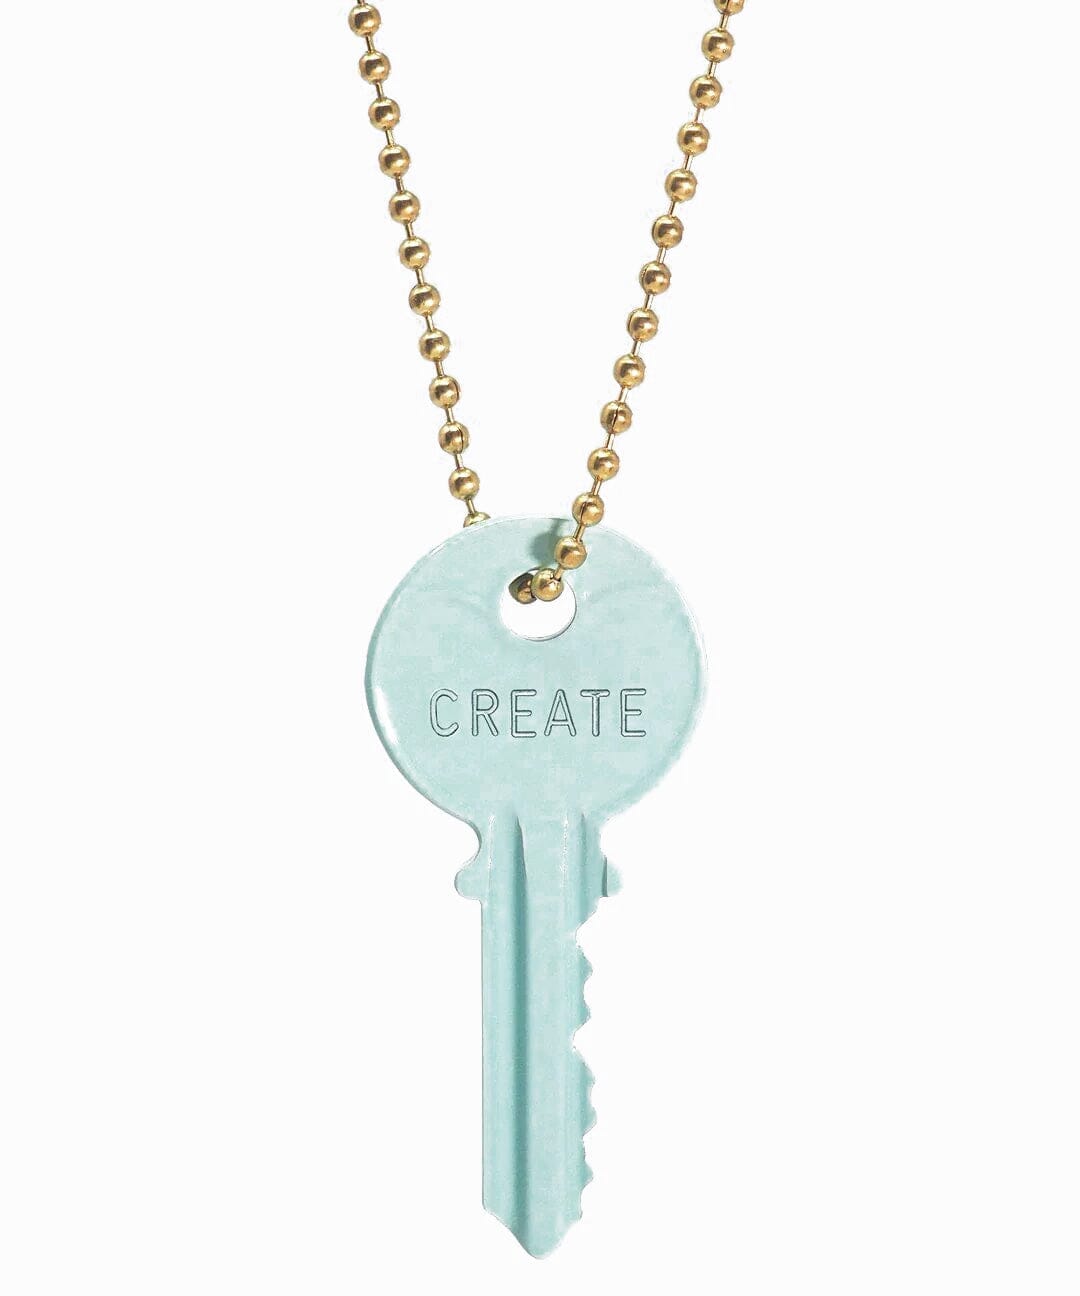 N - Pastel Green Classic Ball Chain Key Necklace Necklaces The Giving Keys 